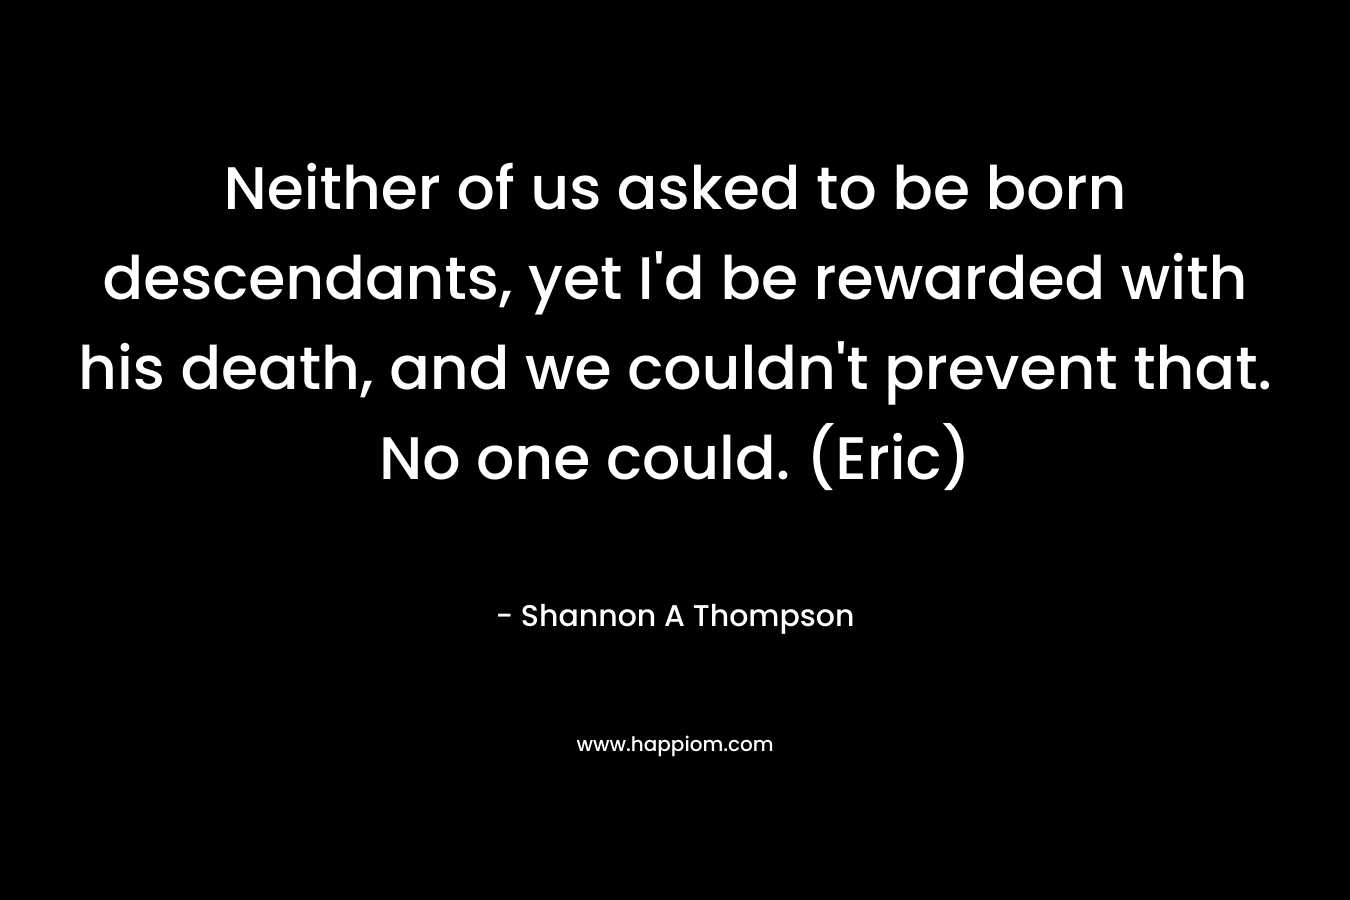 Neither of us asked to be born descendants, yet I'd be rewarded with his death, and we couldn't prevent that. No one could. (Eric)